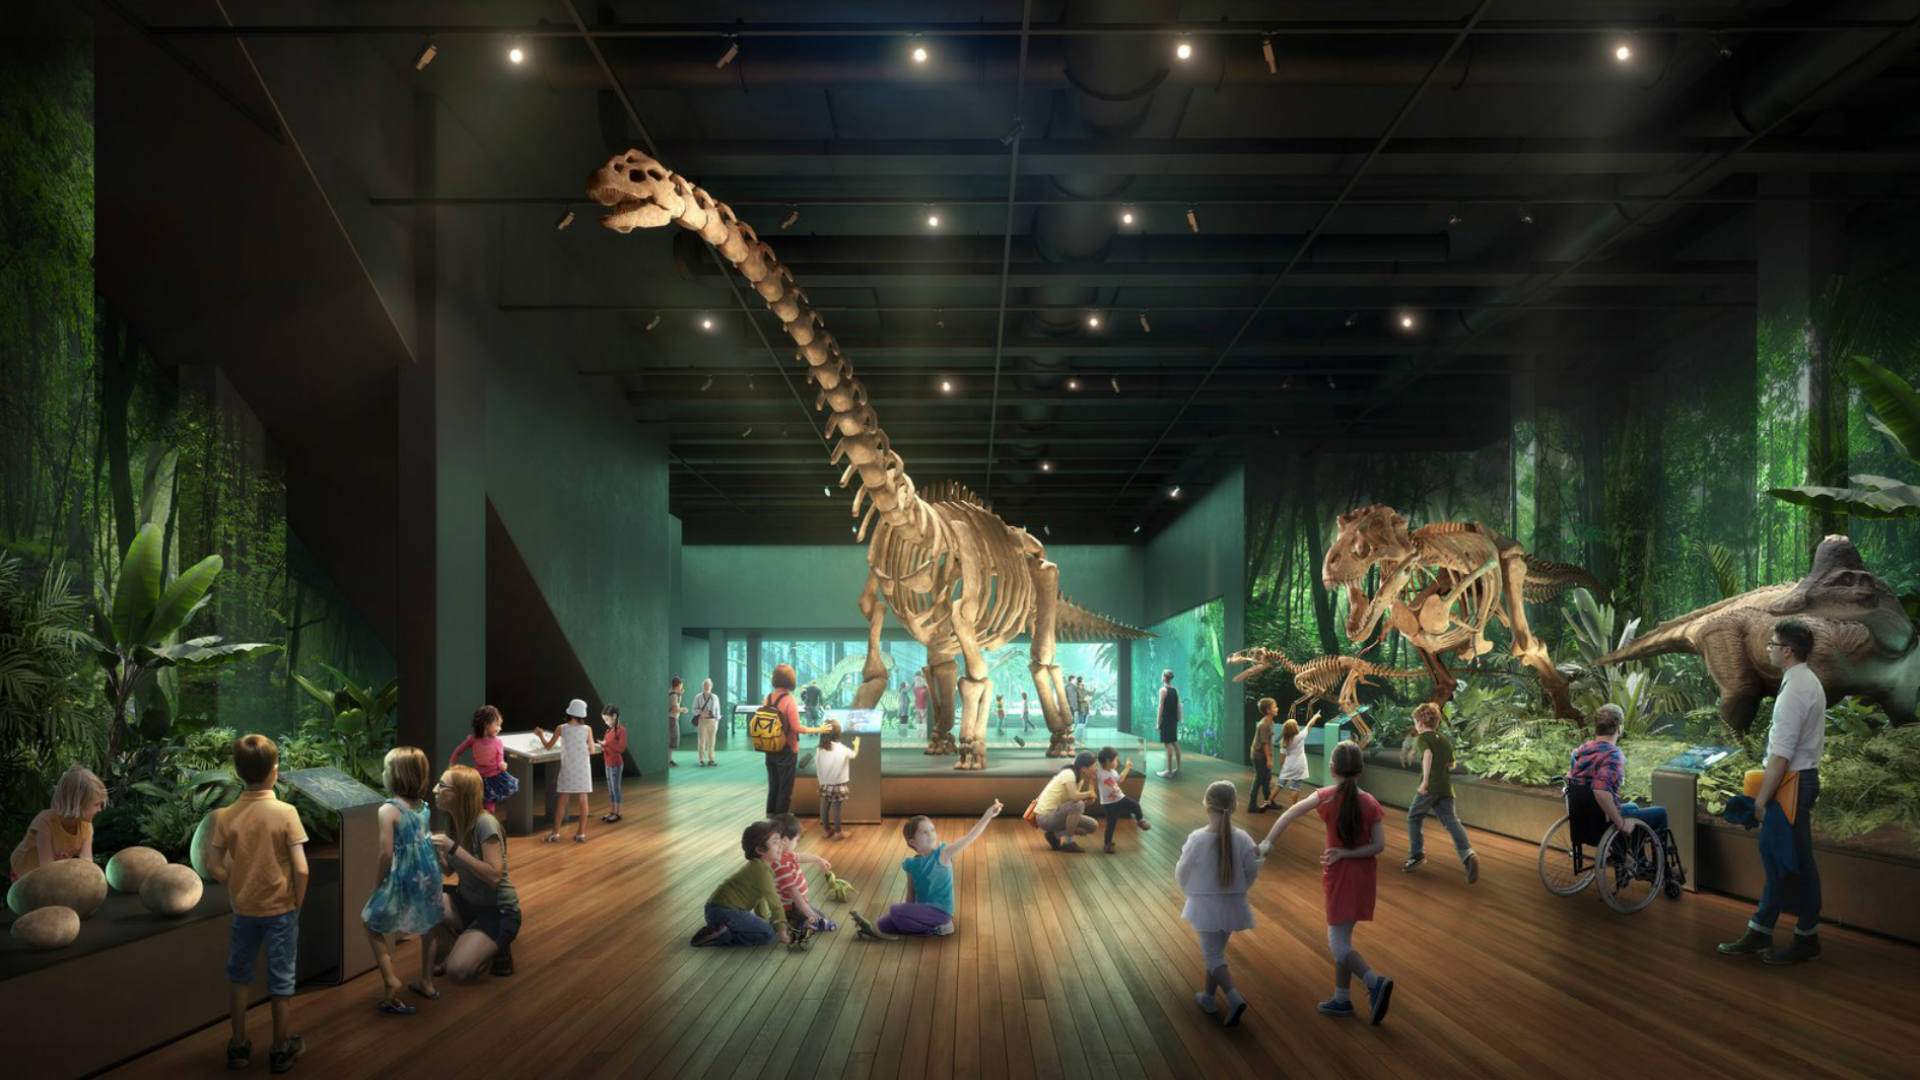 The Australian Museum Is Set to Close for a $57.5 Million Revamp